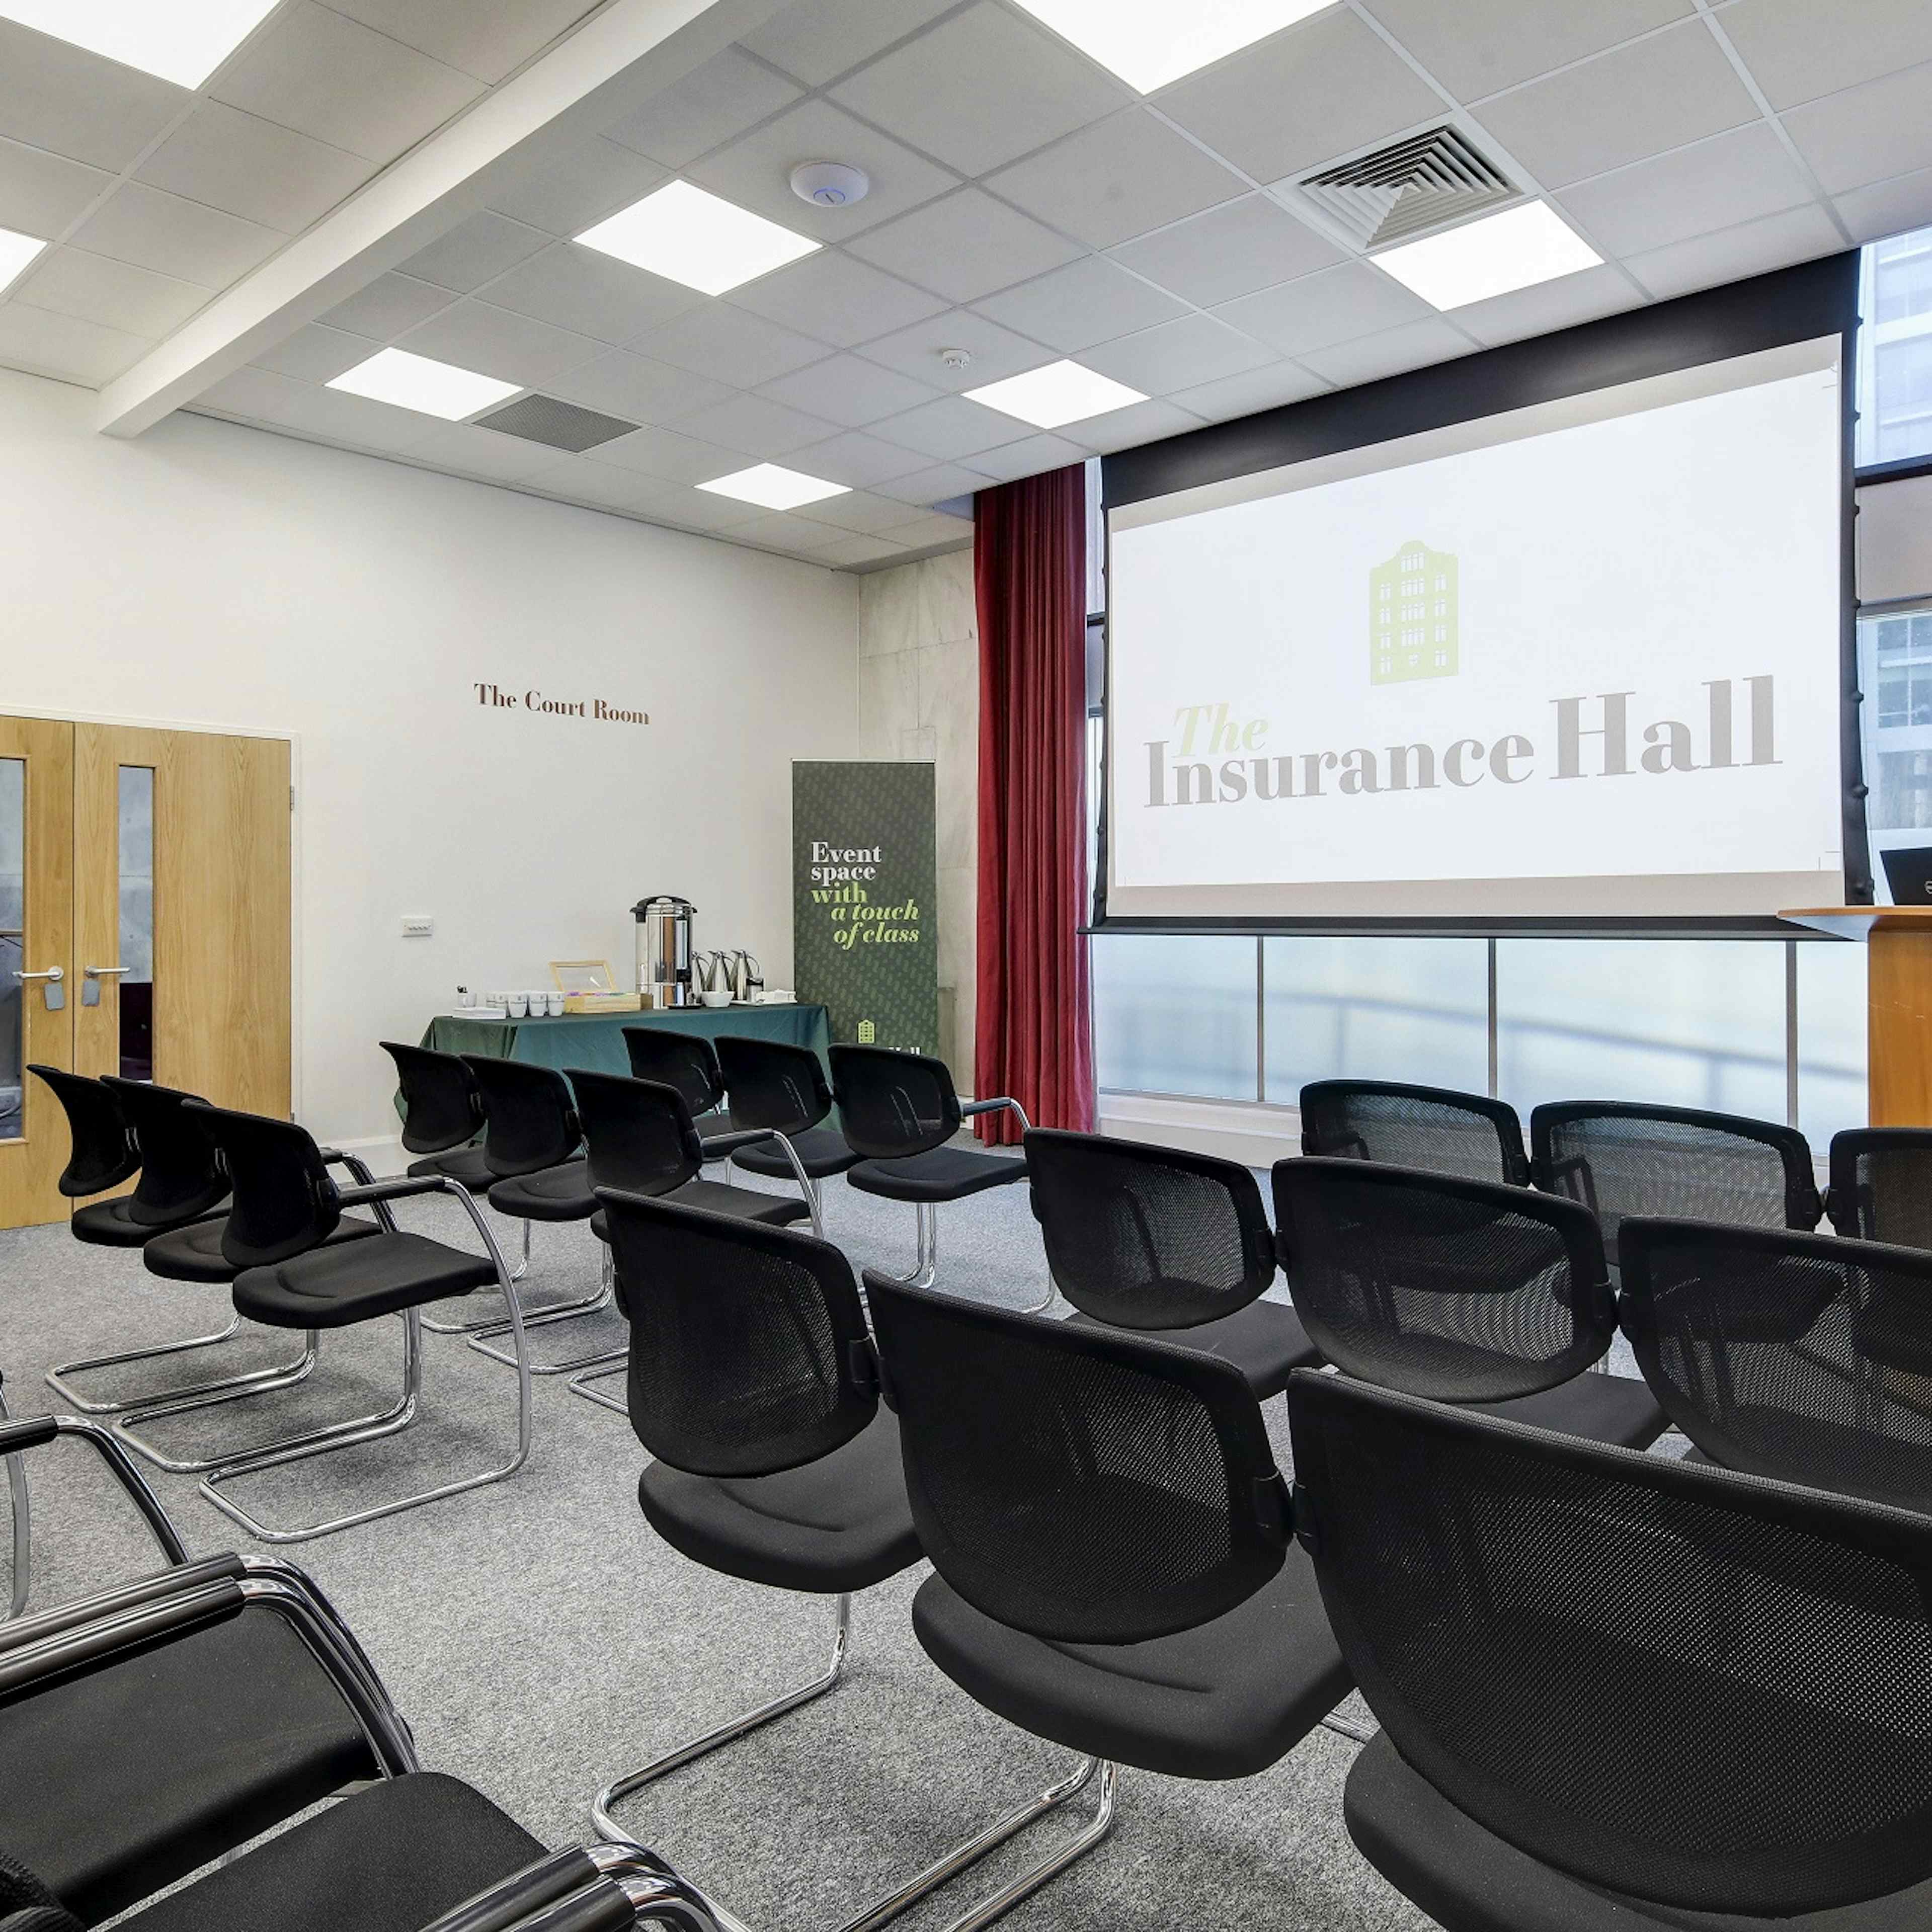 The Insurance Hall - The Court Room image 2